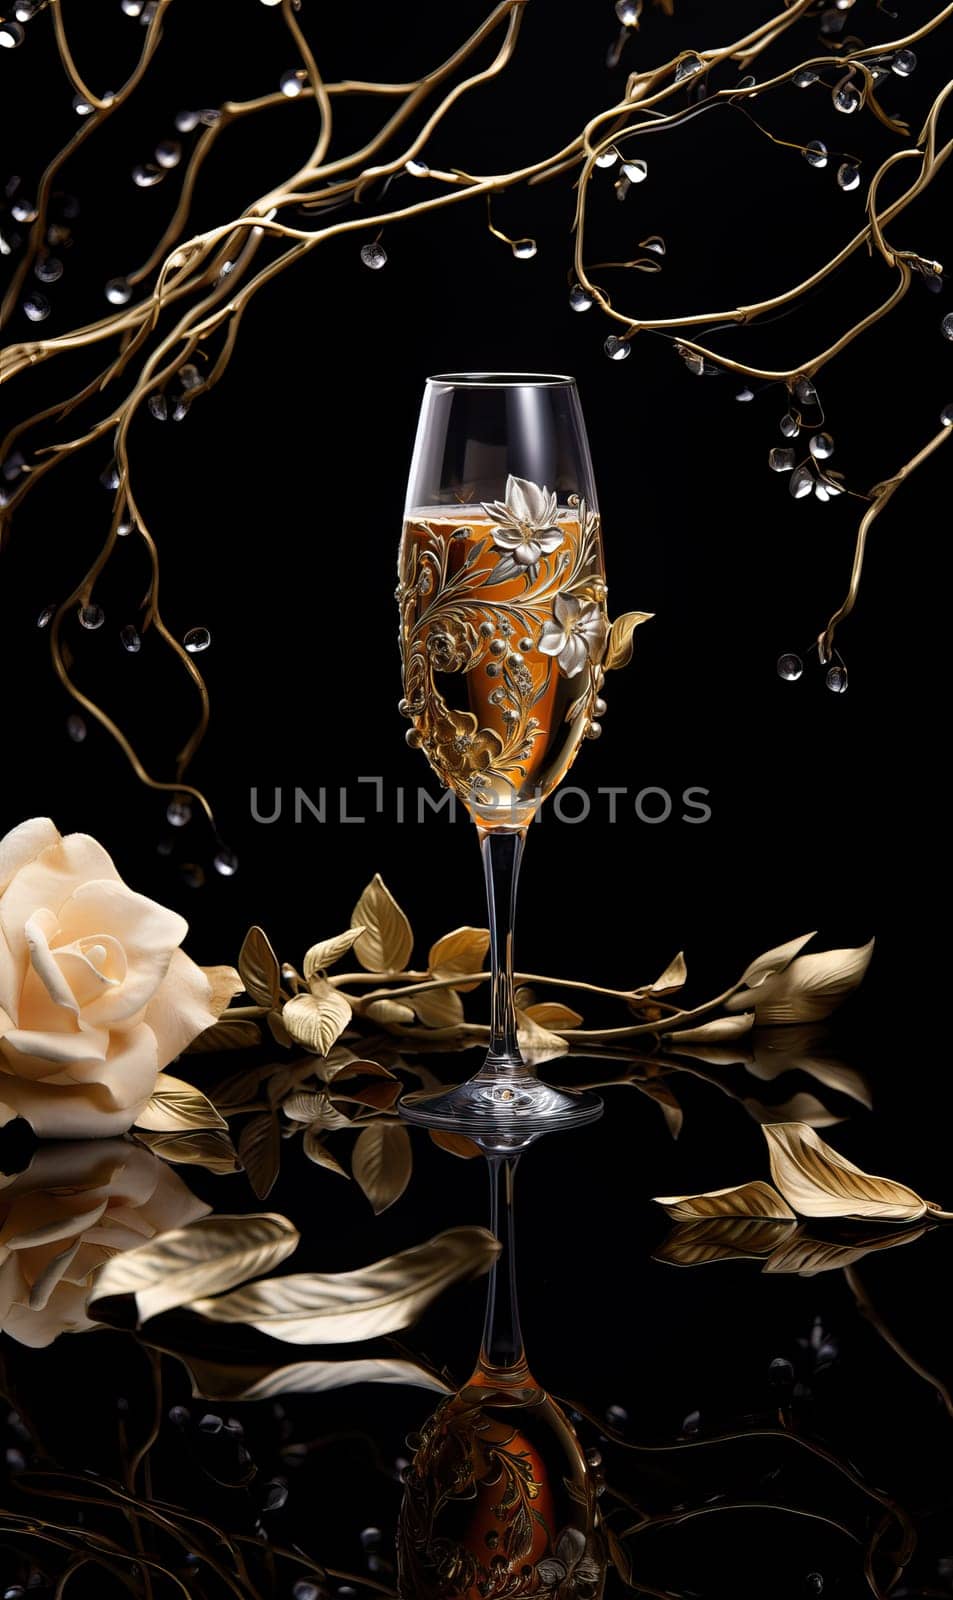 Glass of wine or champagne on a dark background. by Fischeron